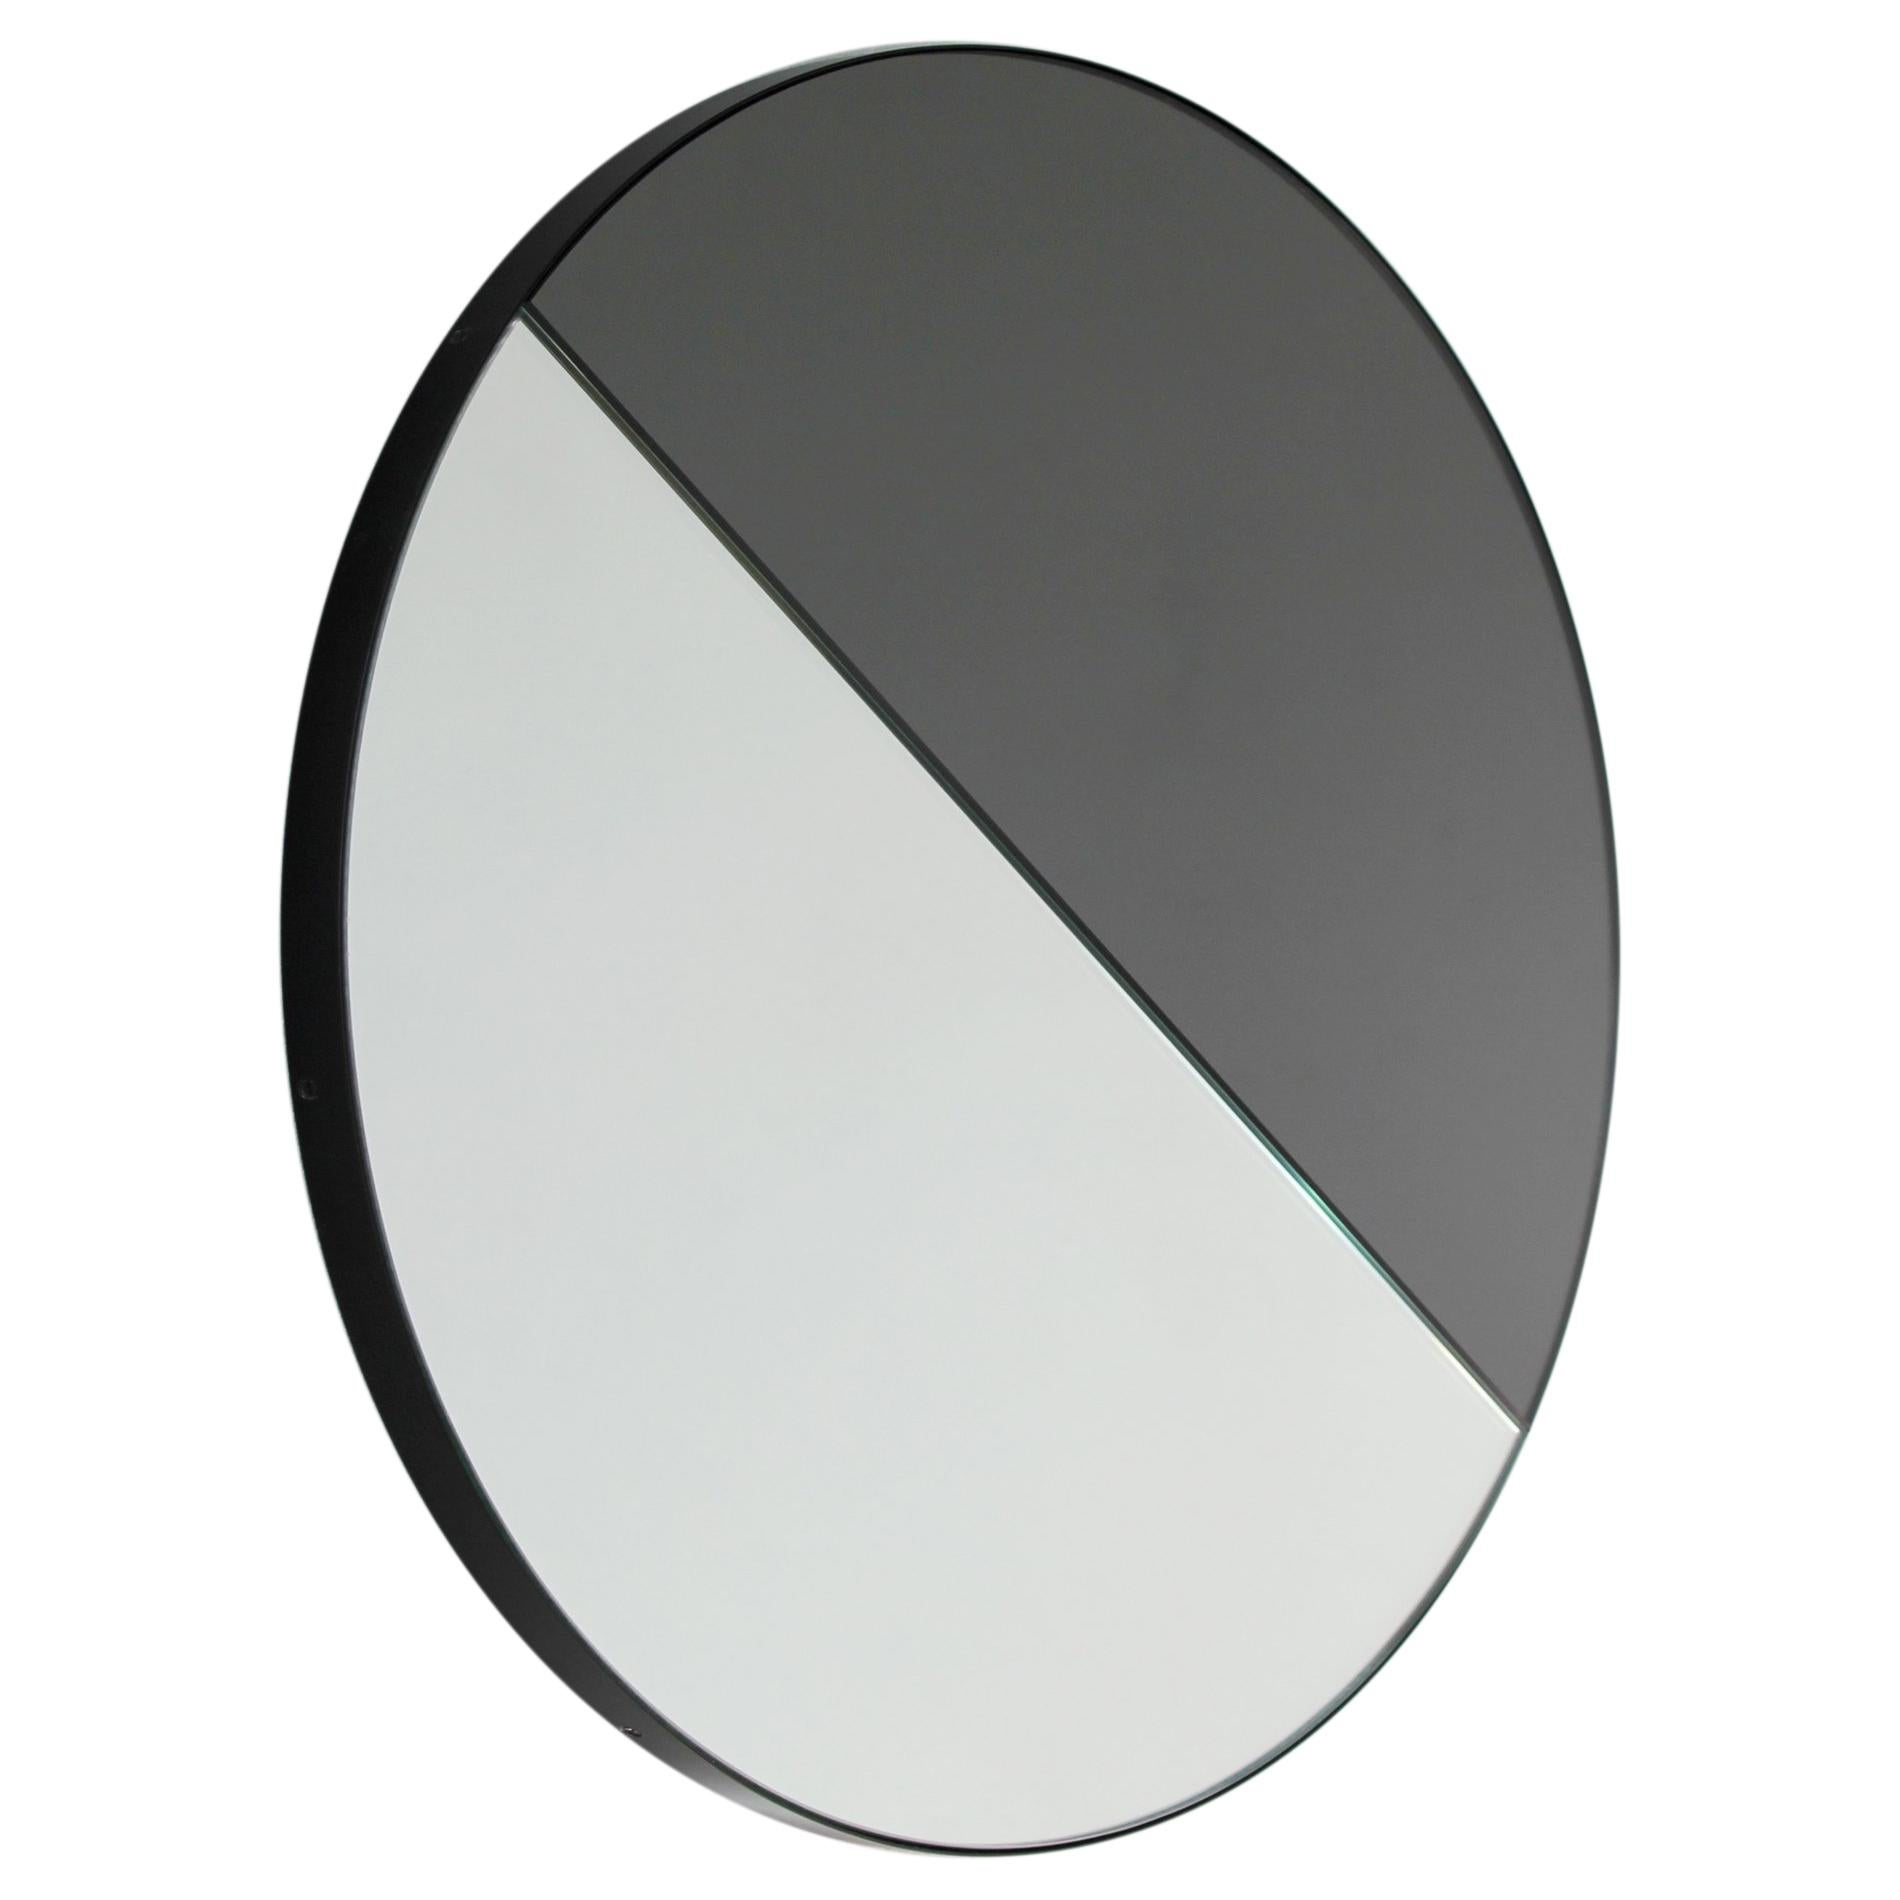 Orbis Dualis Mixed Tint Contemporary Round Mirror with Black Frame, XL For Sale